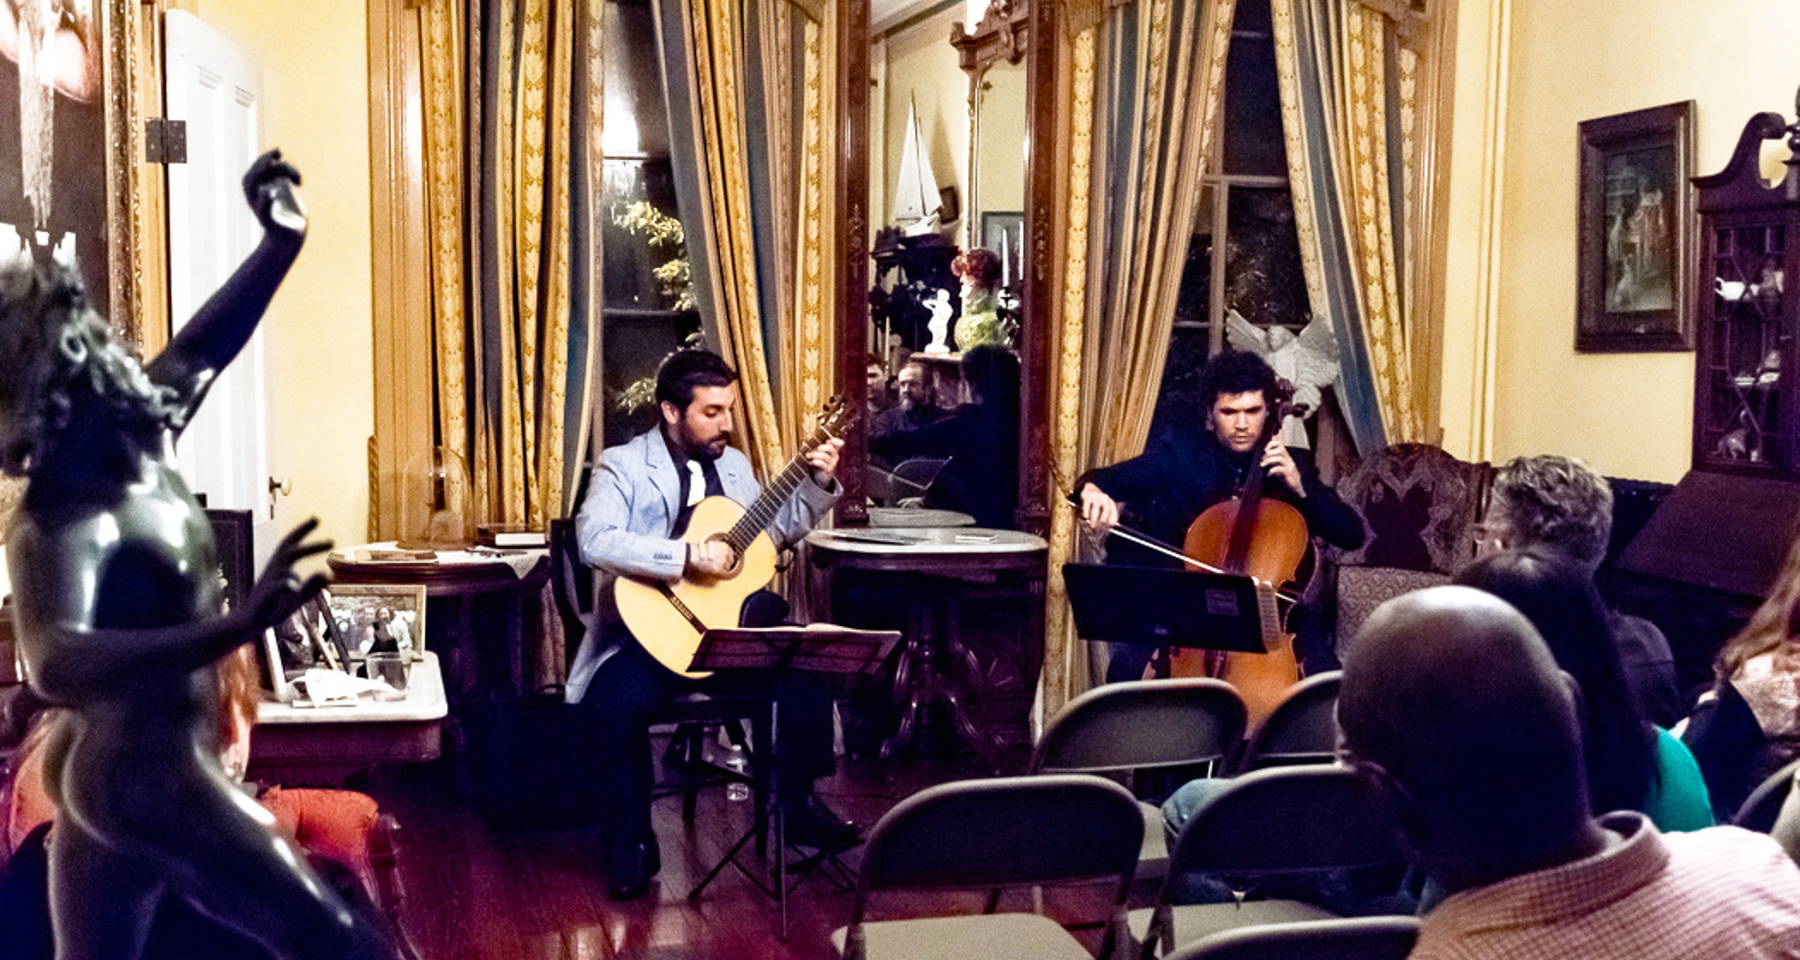 Classical Guitar Concert at the historic Polish Club in the Mission District 